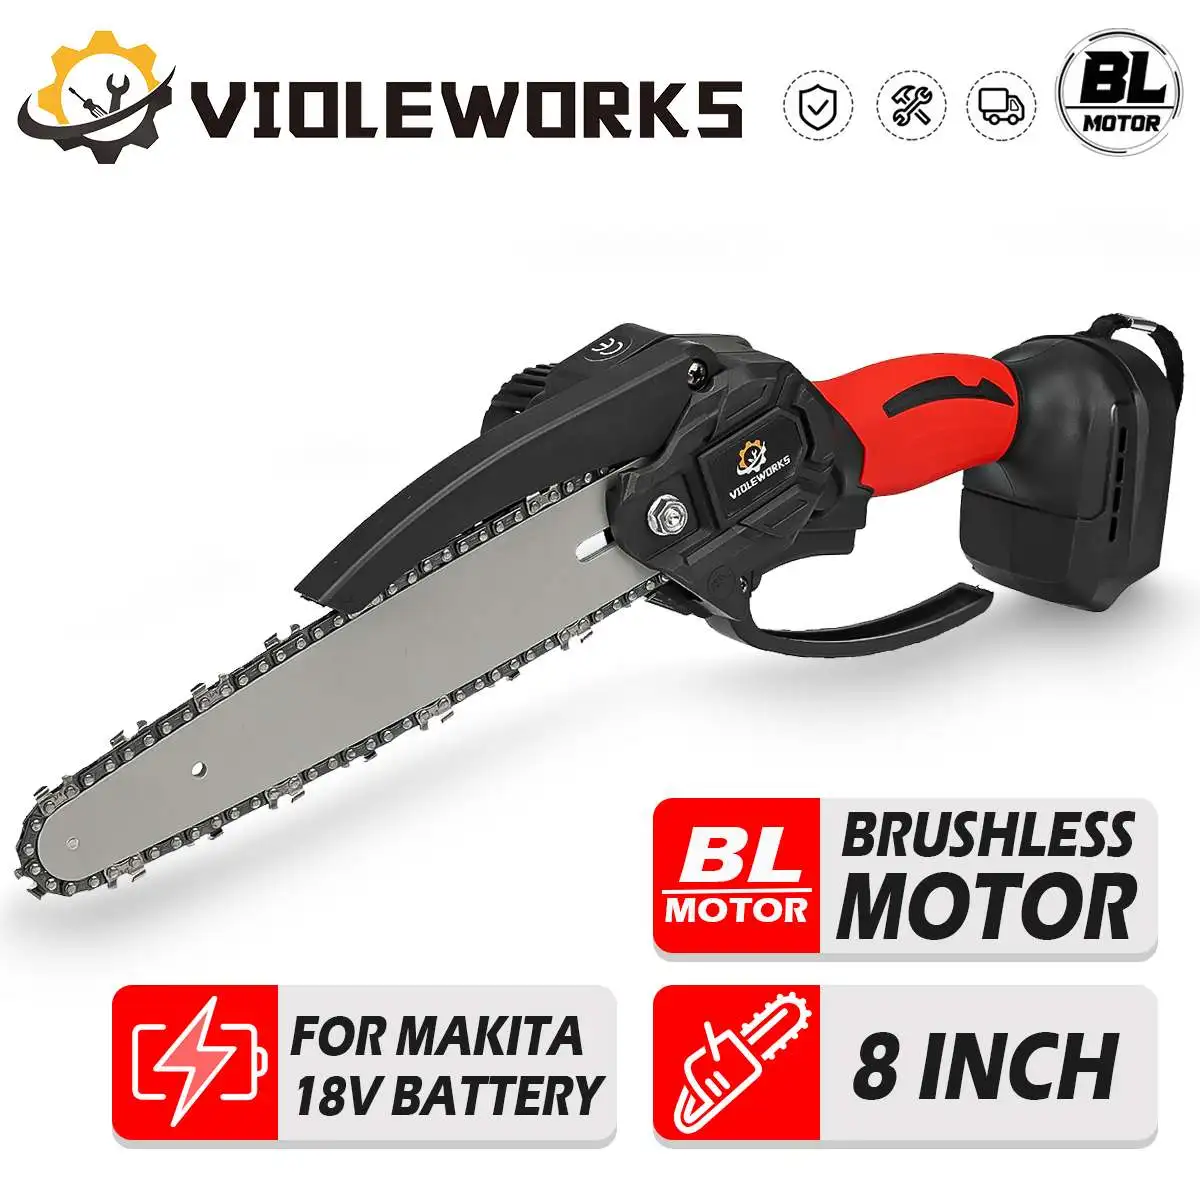 

8 Inch 21V Brushless Electric Saw Cordless Chainsaw Only Body No Battery Woodworking Cutter Power Tool For Makita 18V Battery